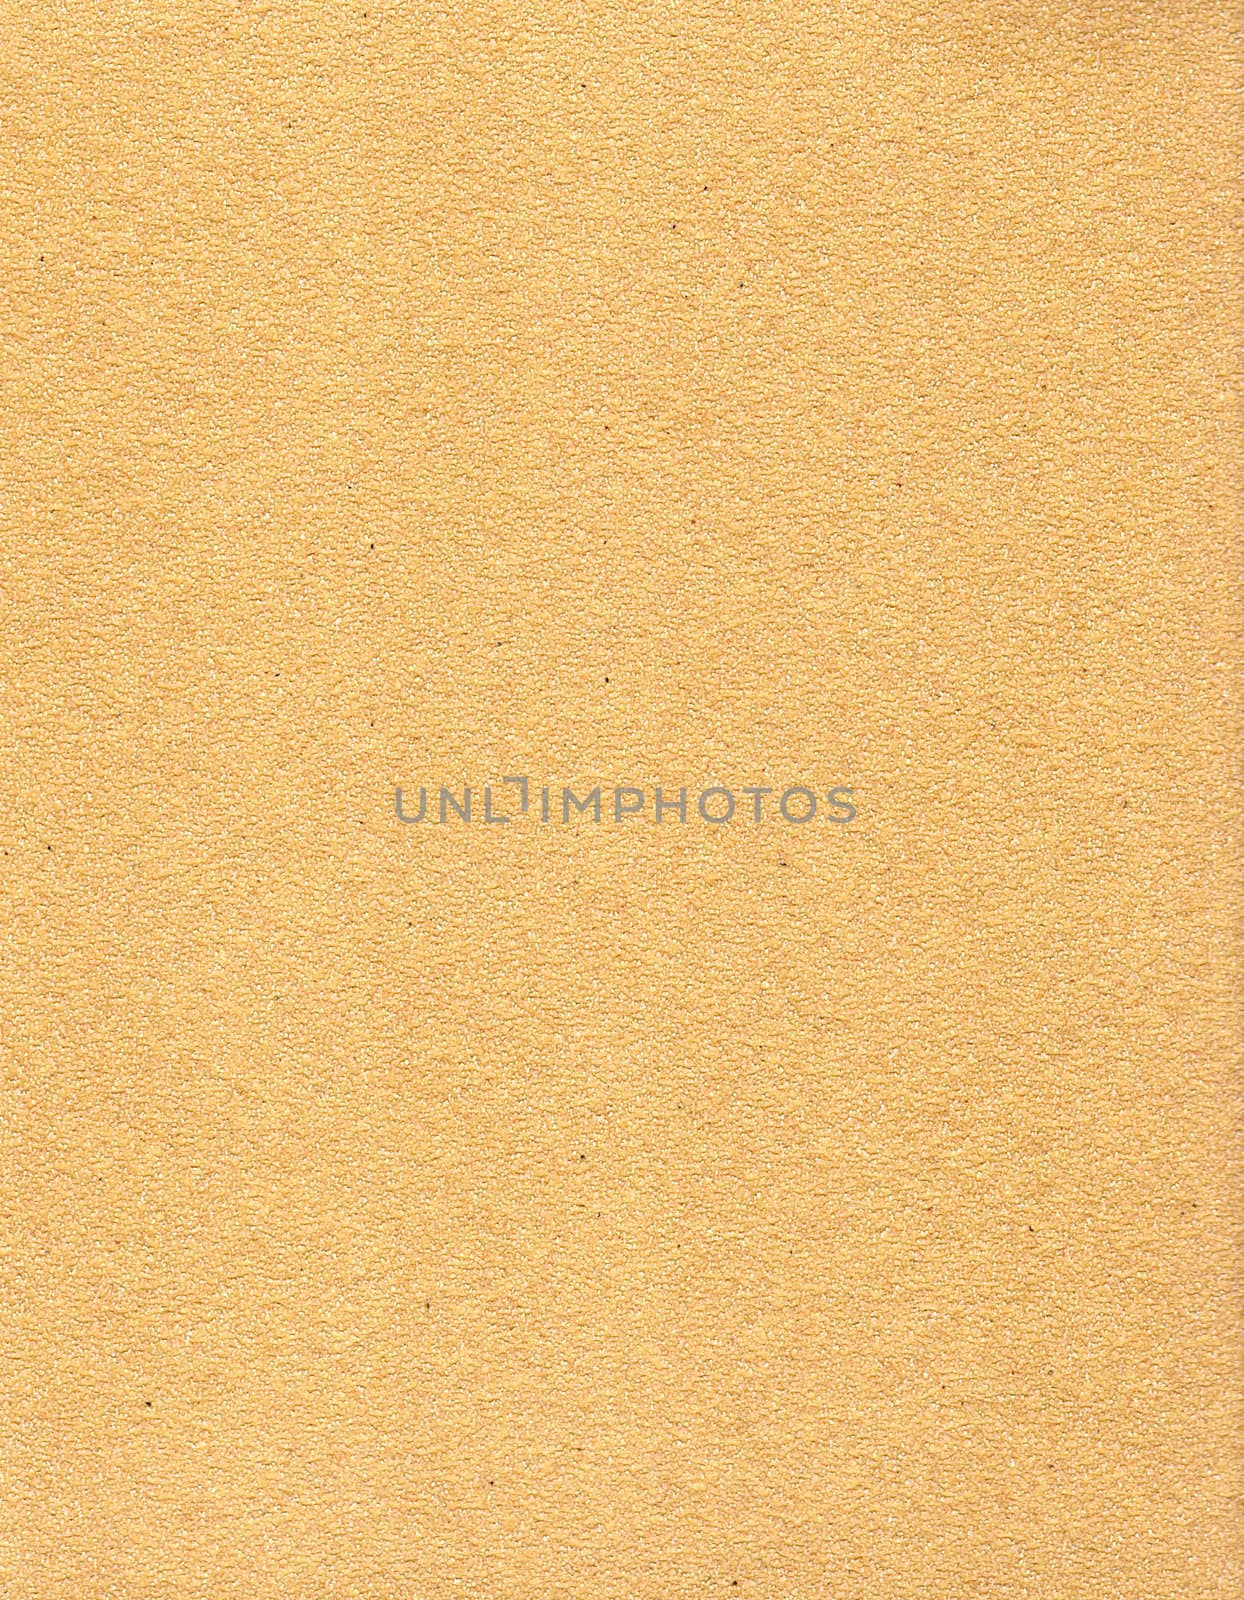 A sheet of yellow sandpaper suitable as a background texture